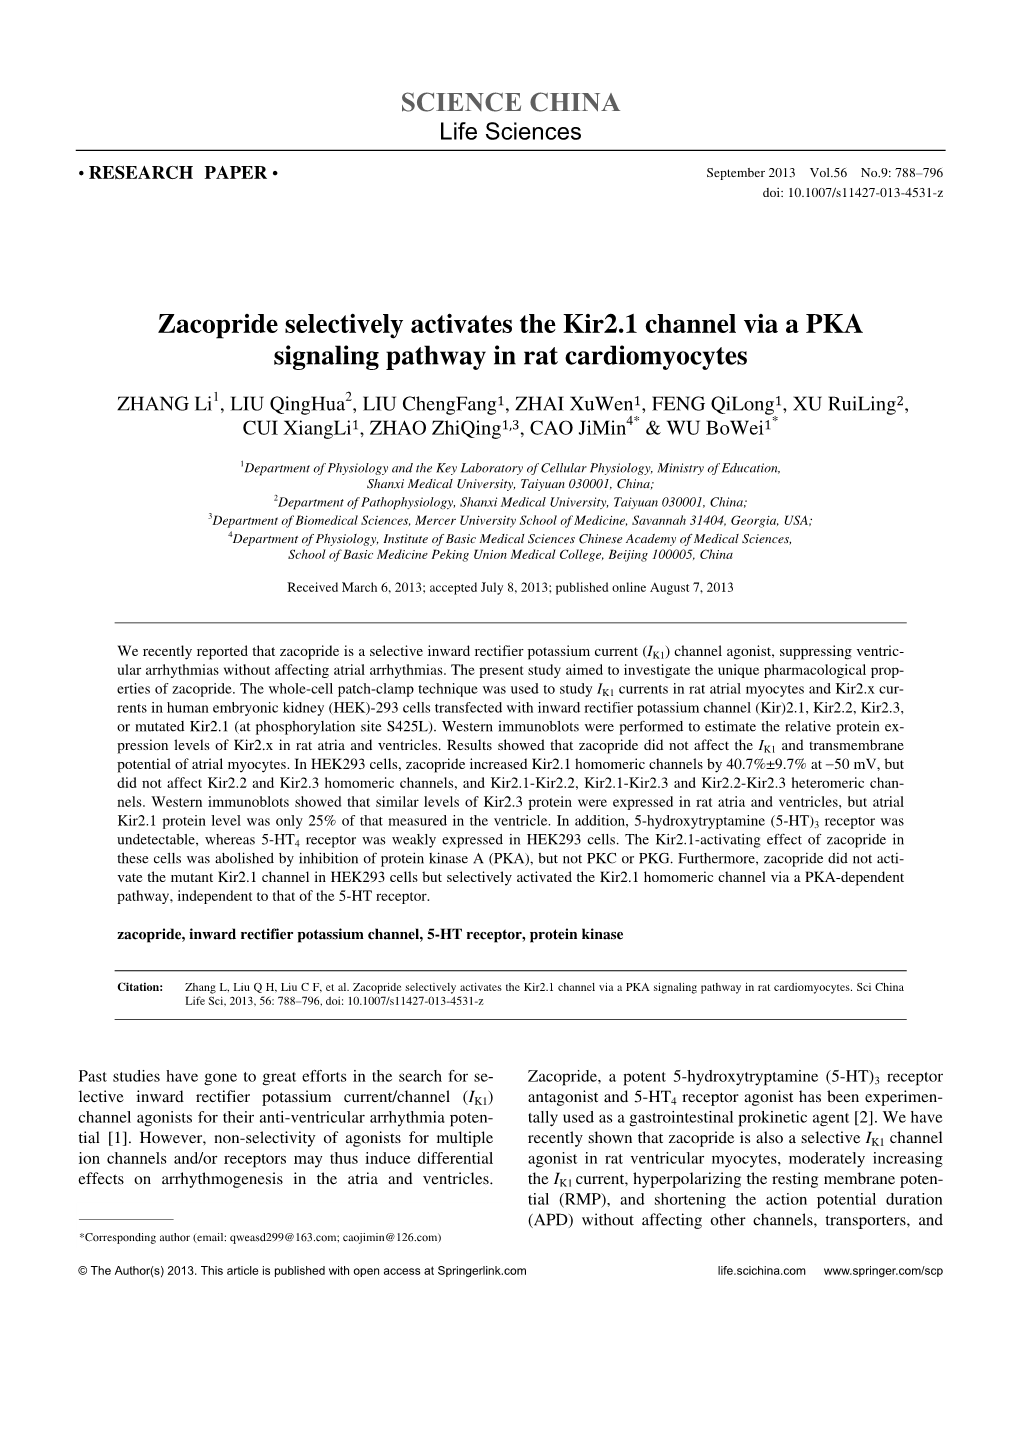 Zacopride Selectively Activates the Kir2. 1 Channel Via a PKA Signaling